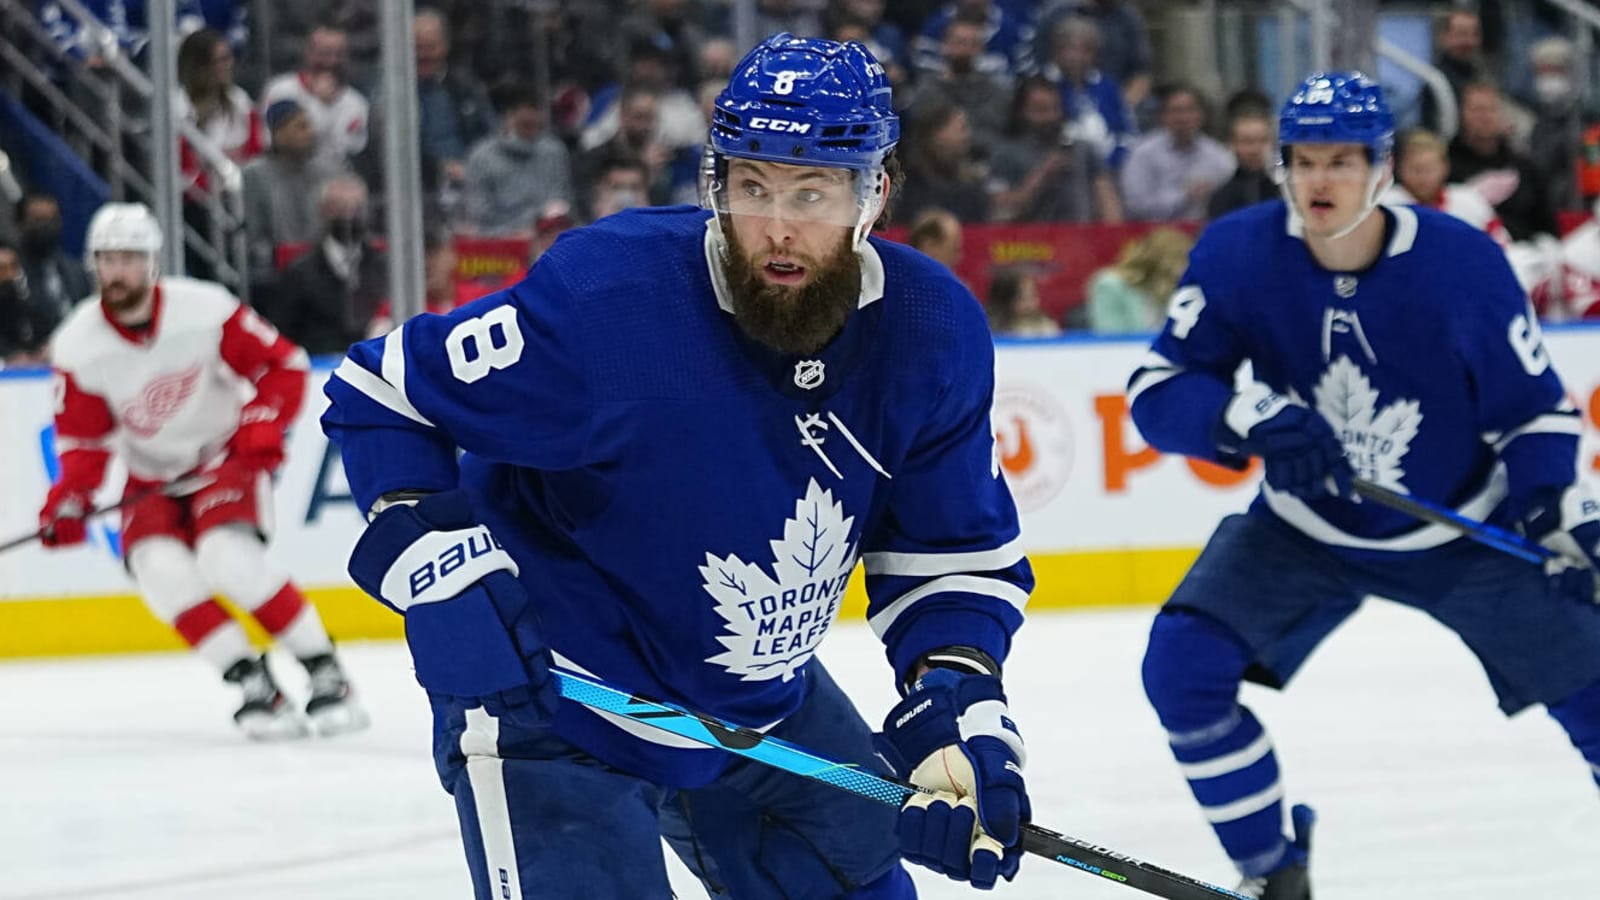 Leafs place Jake Muzzin on injured reserve, call up Filip Kral